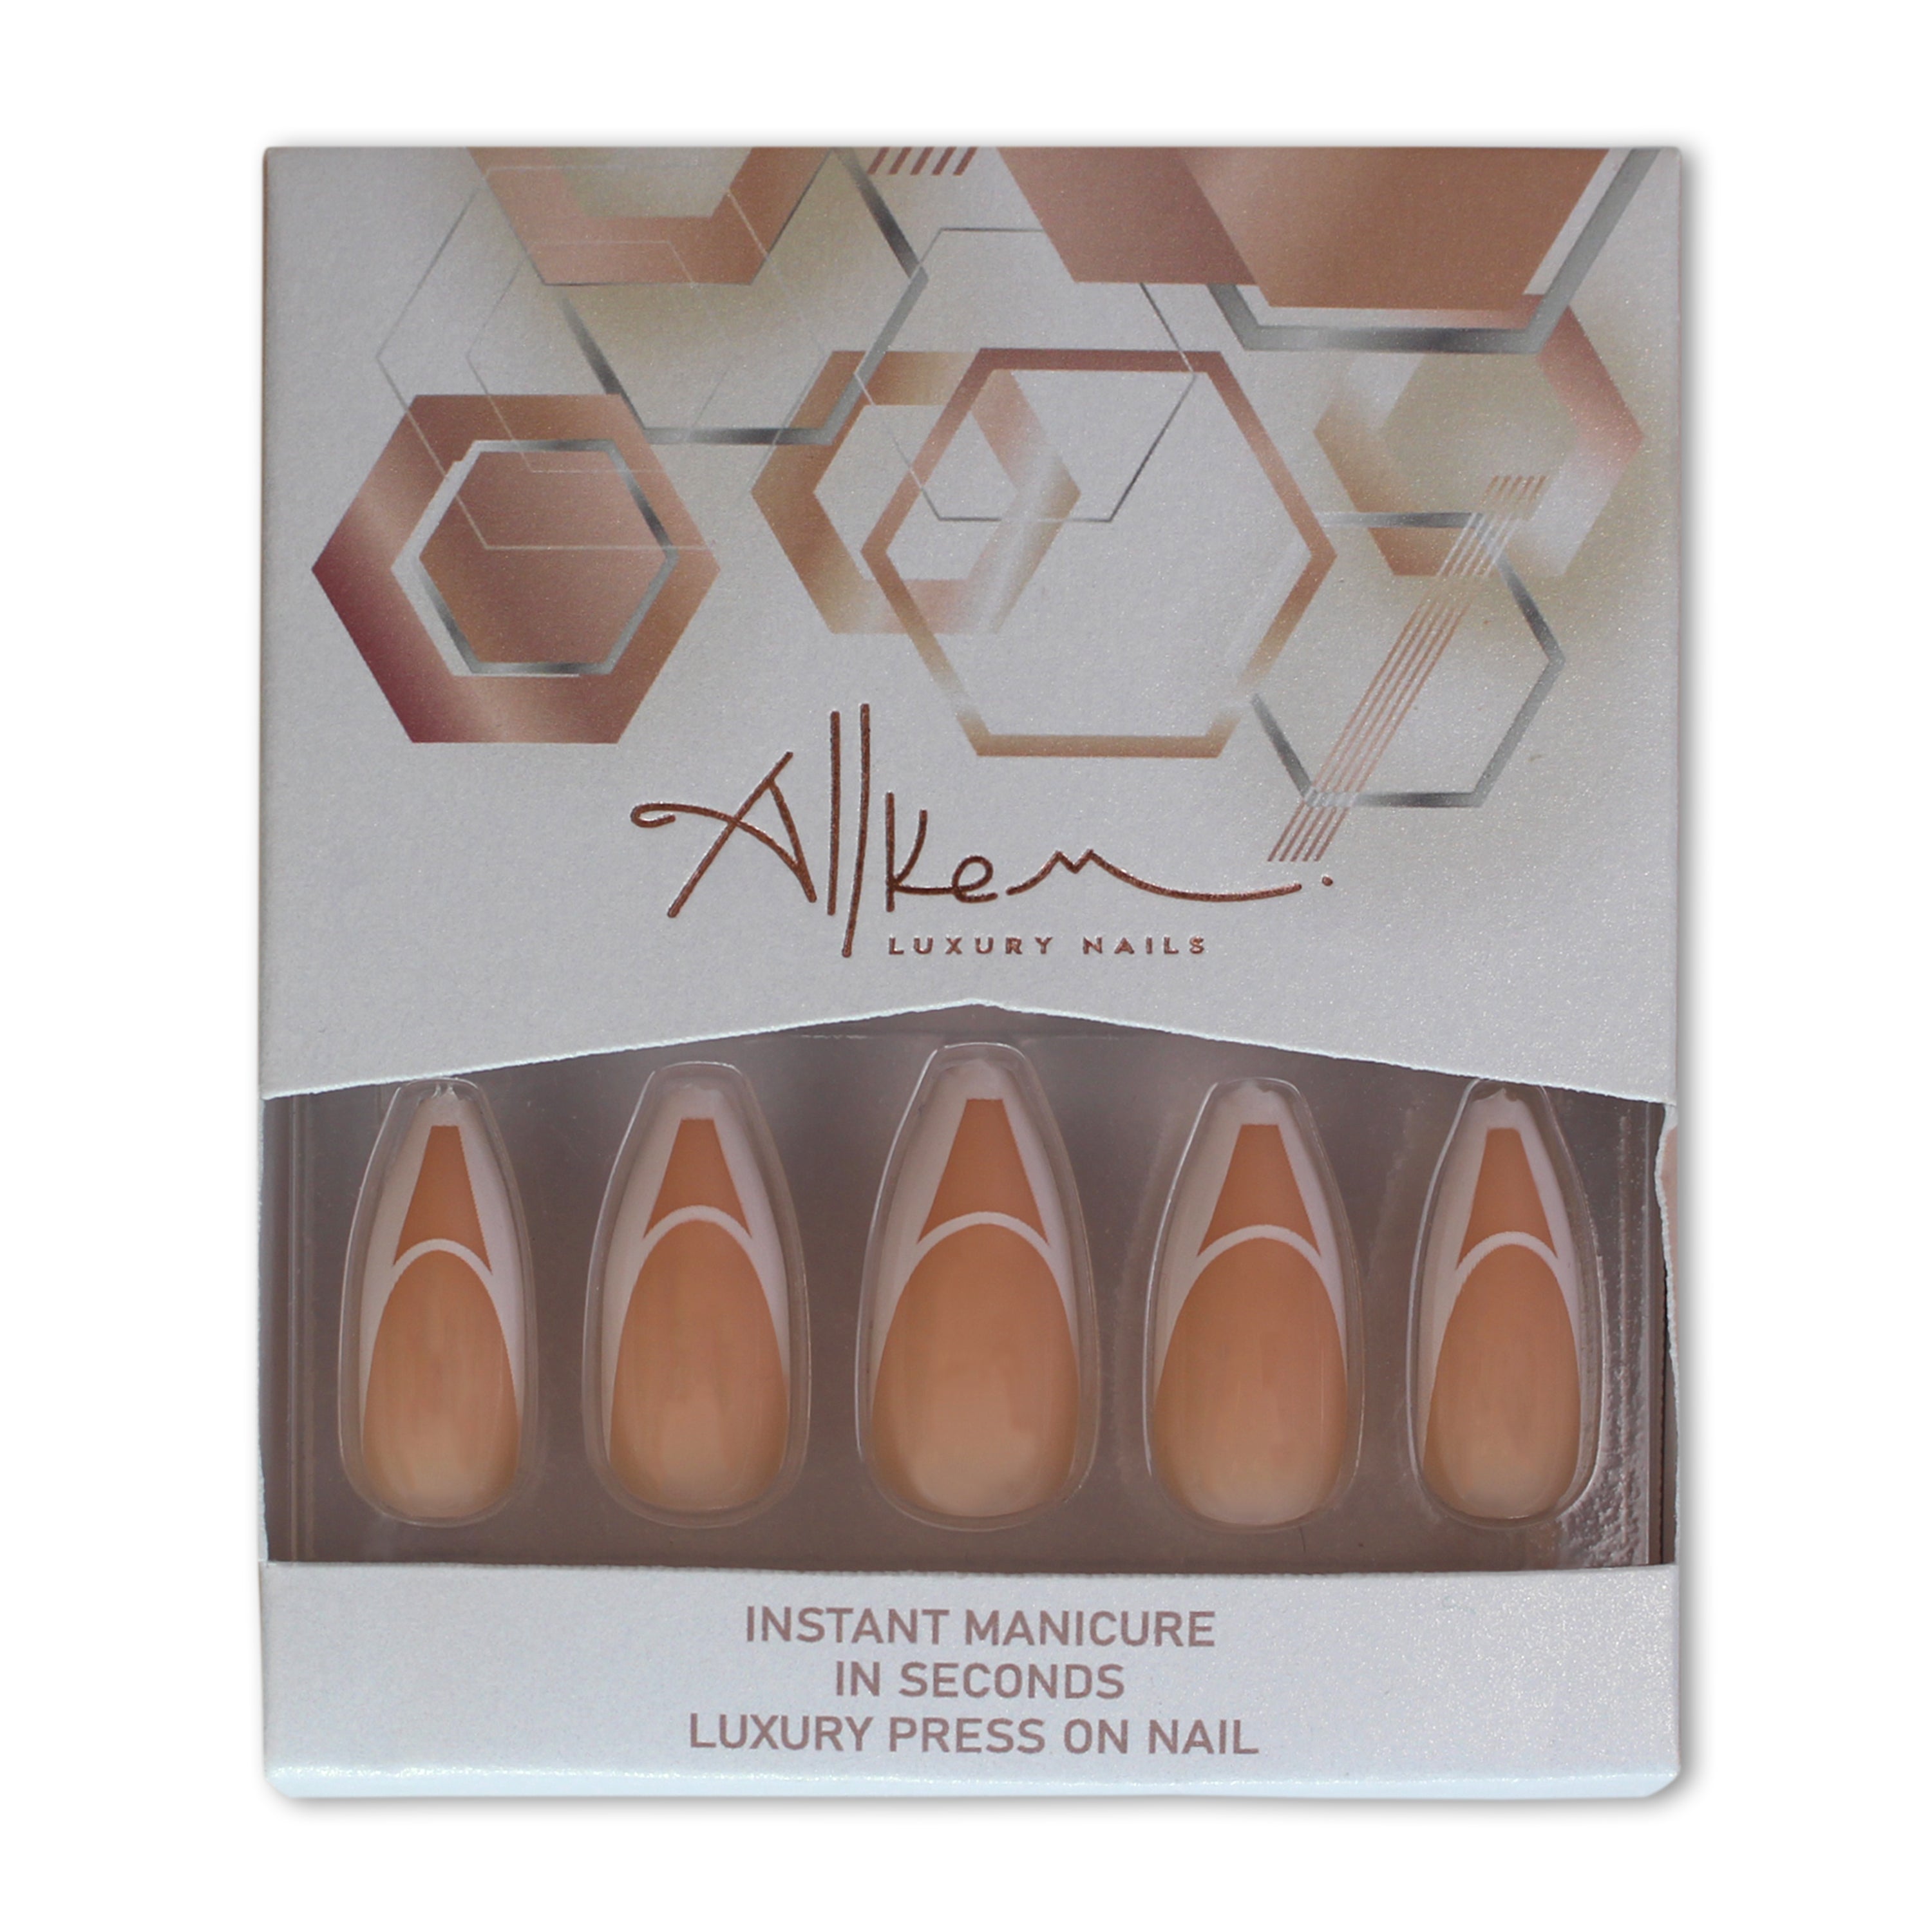 Luxury press on nails at a great price – AllKem Nails